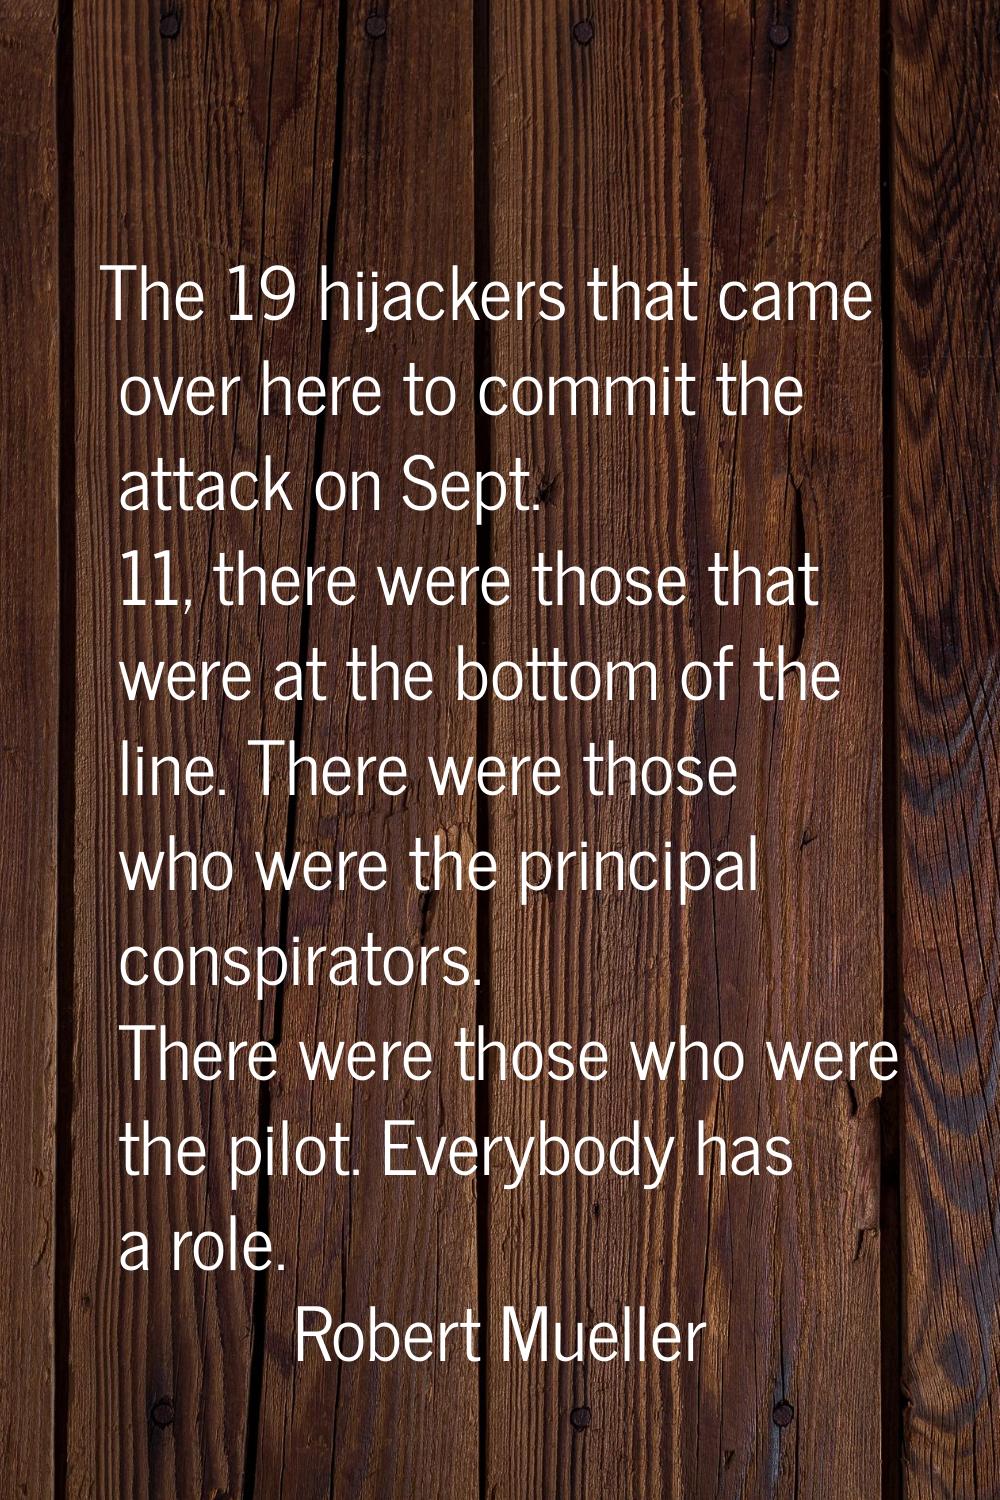 The 19 hijackers that came over here to commit the attack on Sept. 11, there were those that were a